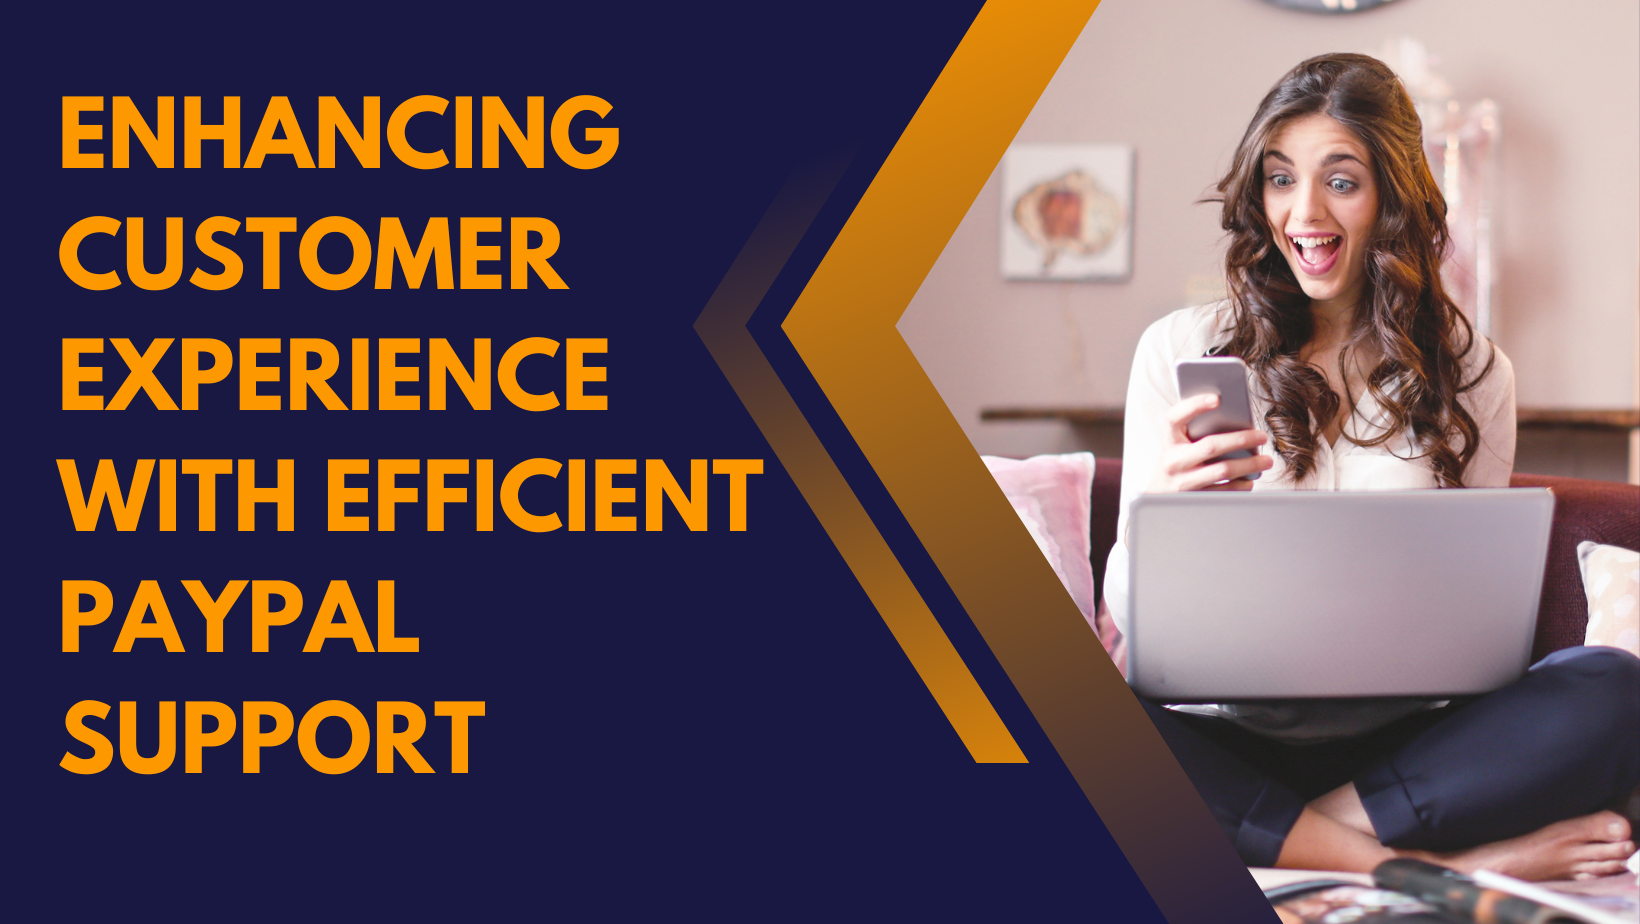 Enhancing Customer Experience with Efficient PayPal Support